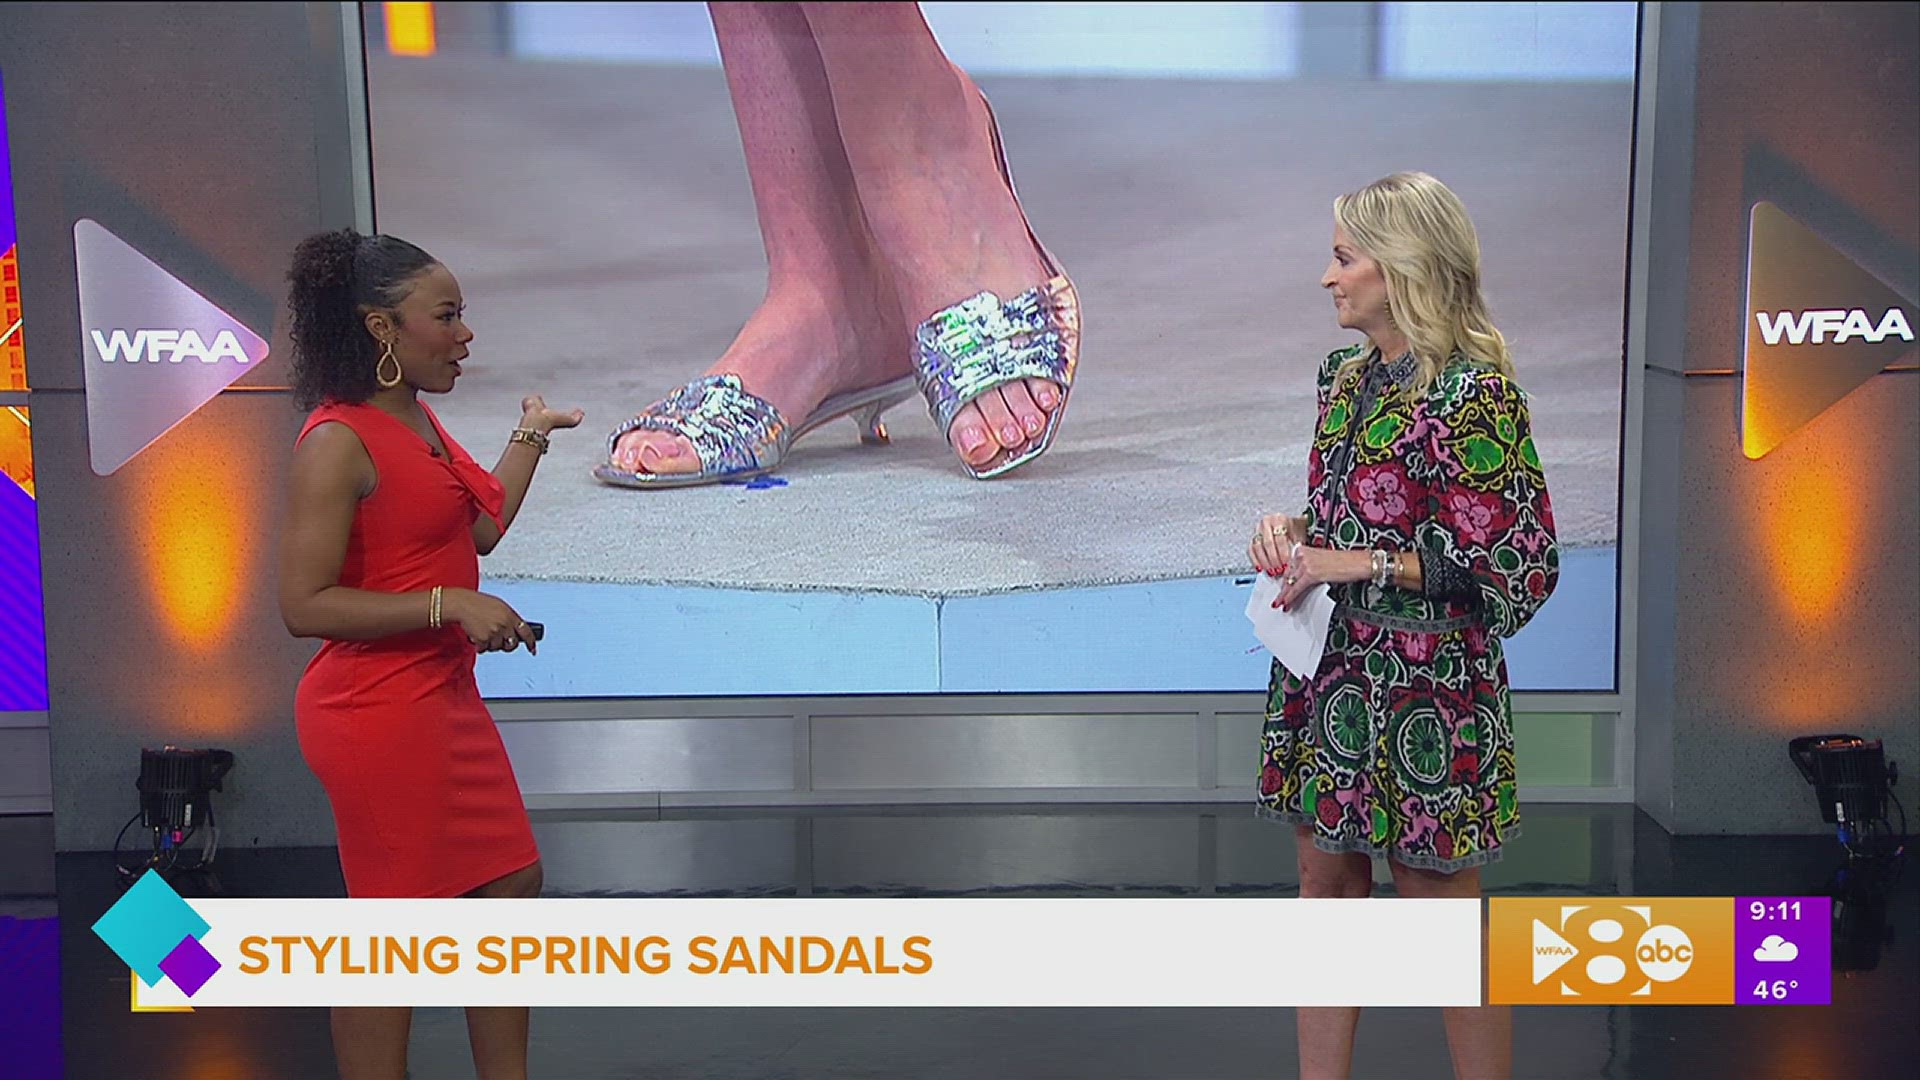 Victoria Snee with Highland Park Village shows us how to style sandals. Go to hpvillage.com for more information.